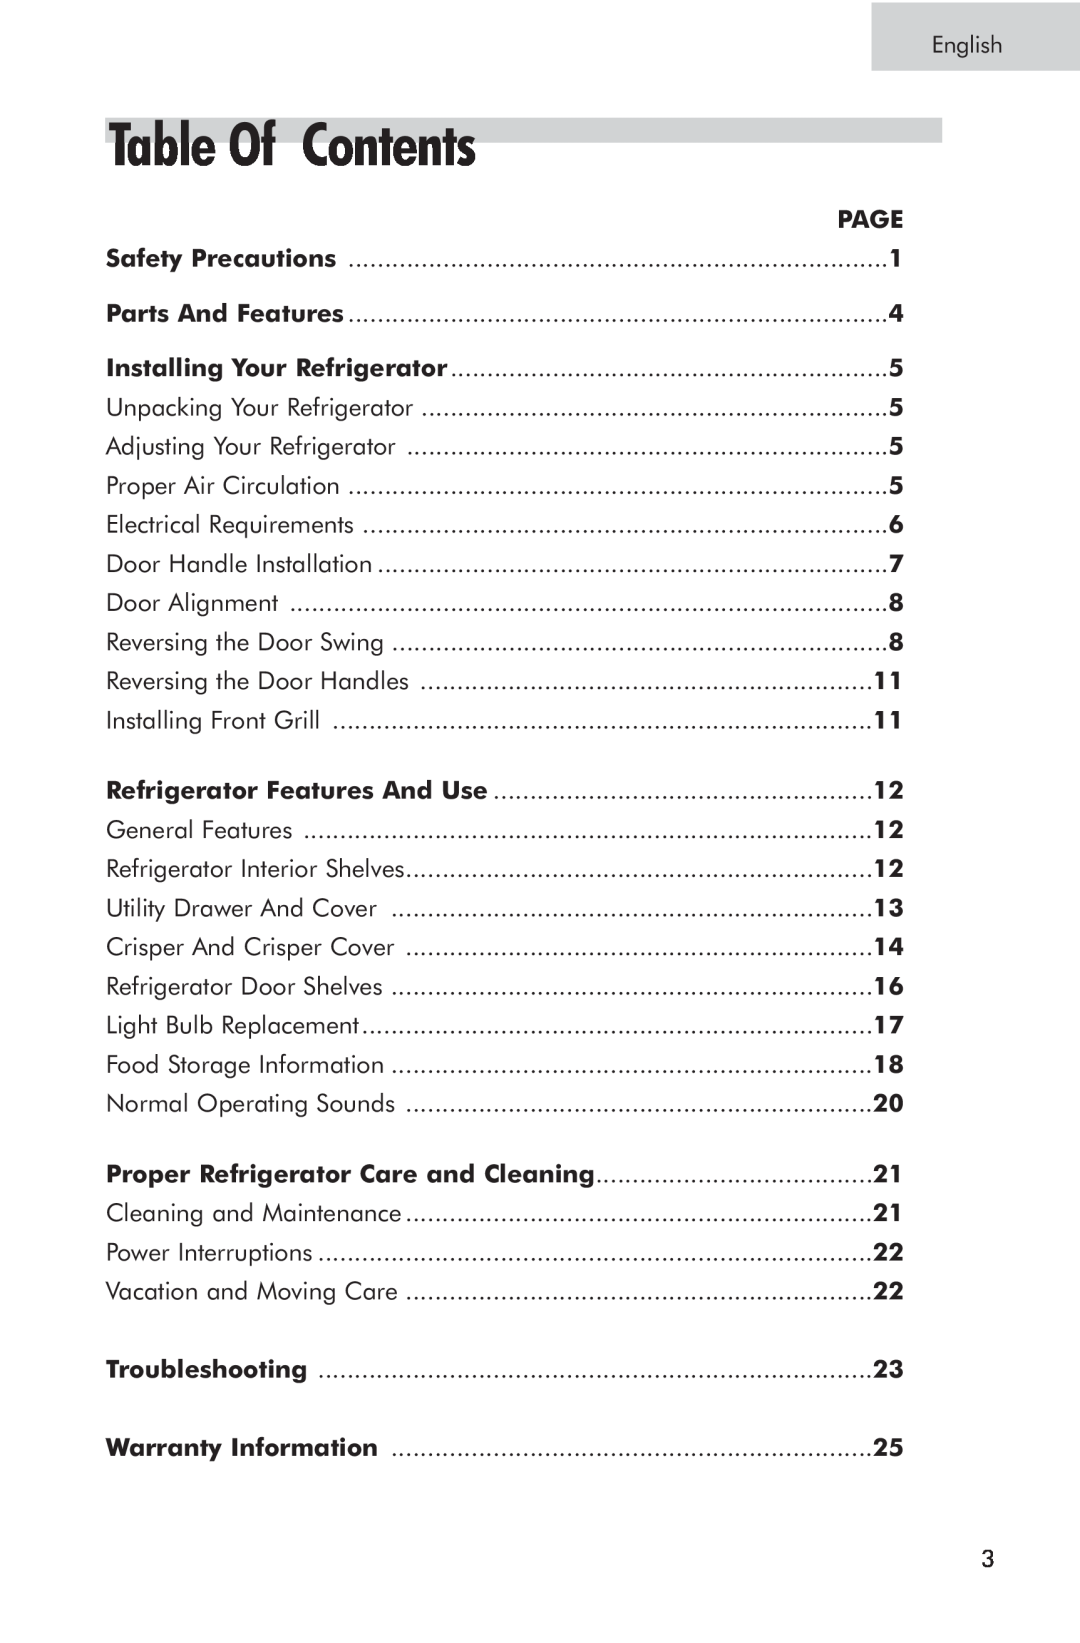 Haier PRTS, RRTG manual Table Of Contents, Proper Refrigerator Care and Cleaning 